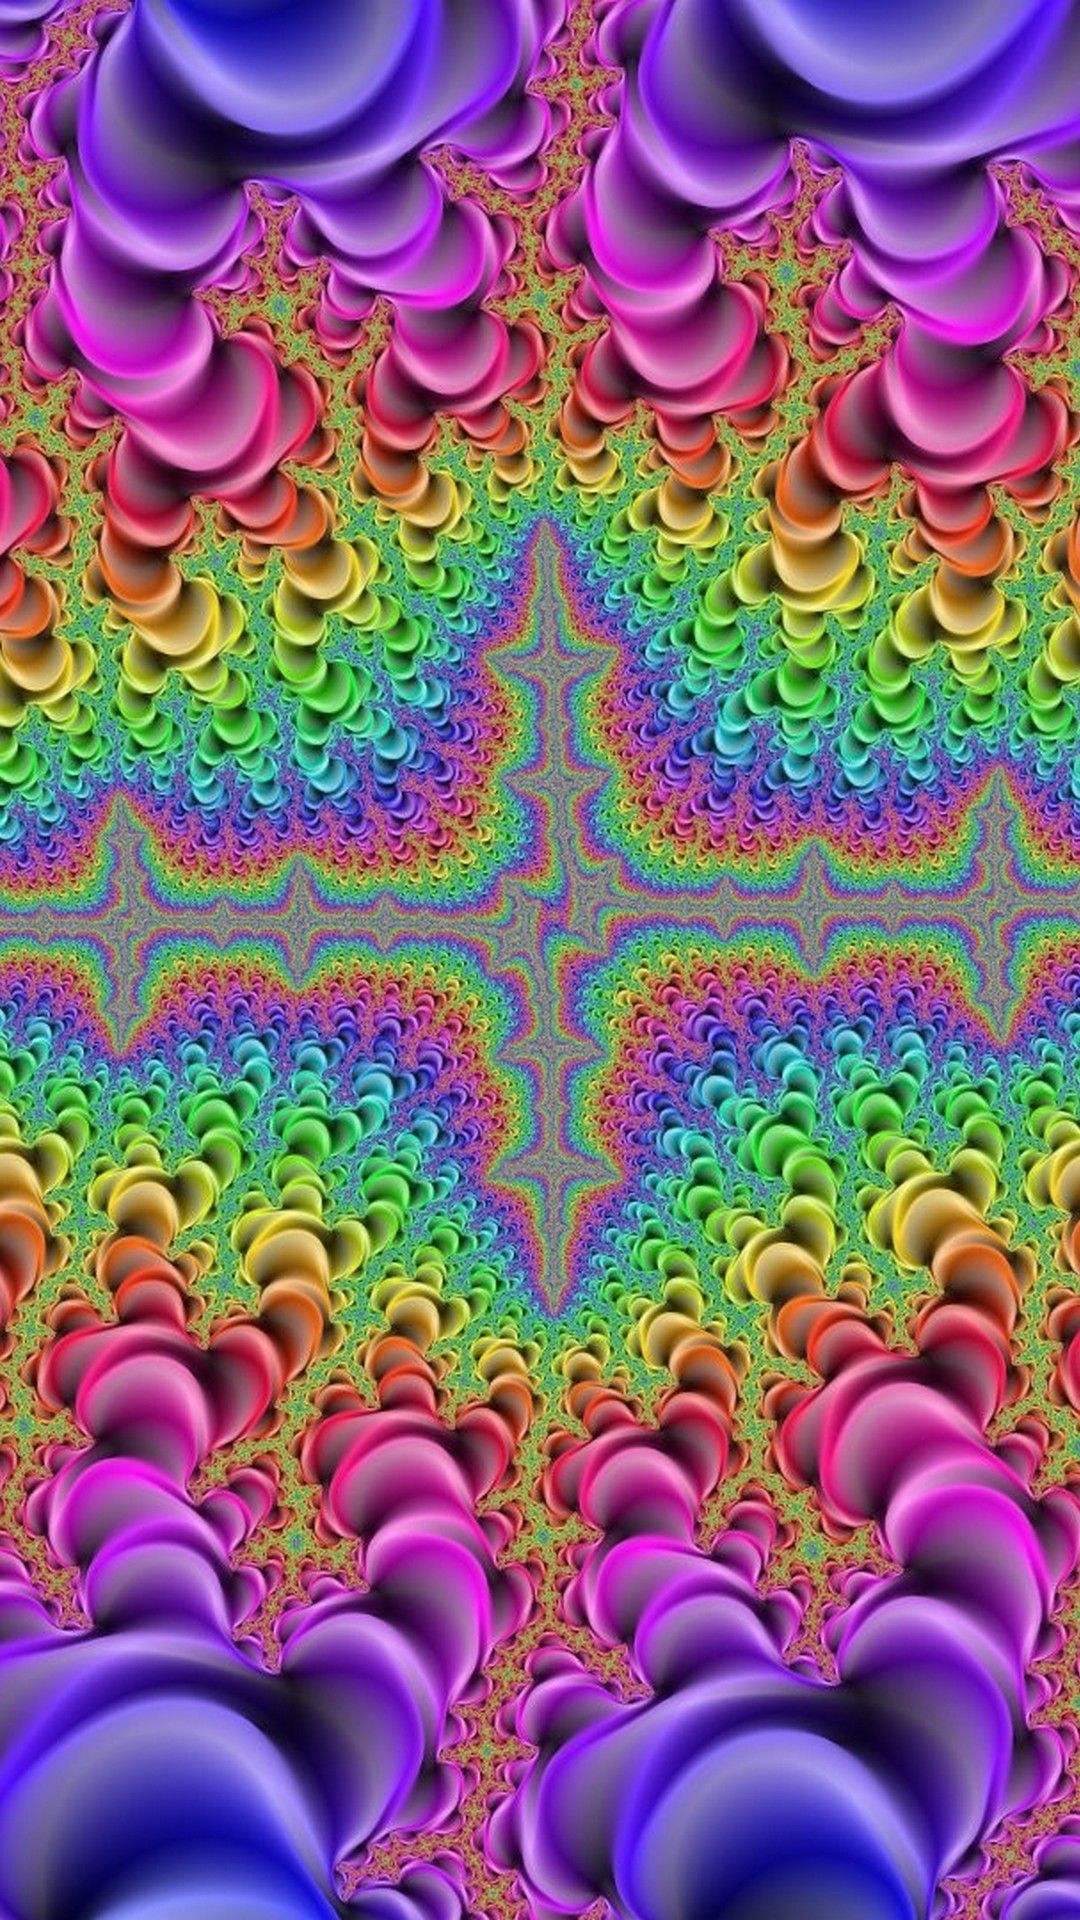 Psychedelic Wallpaper Vector Images over 23000